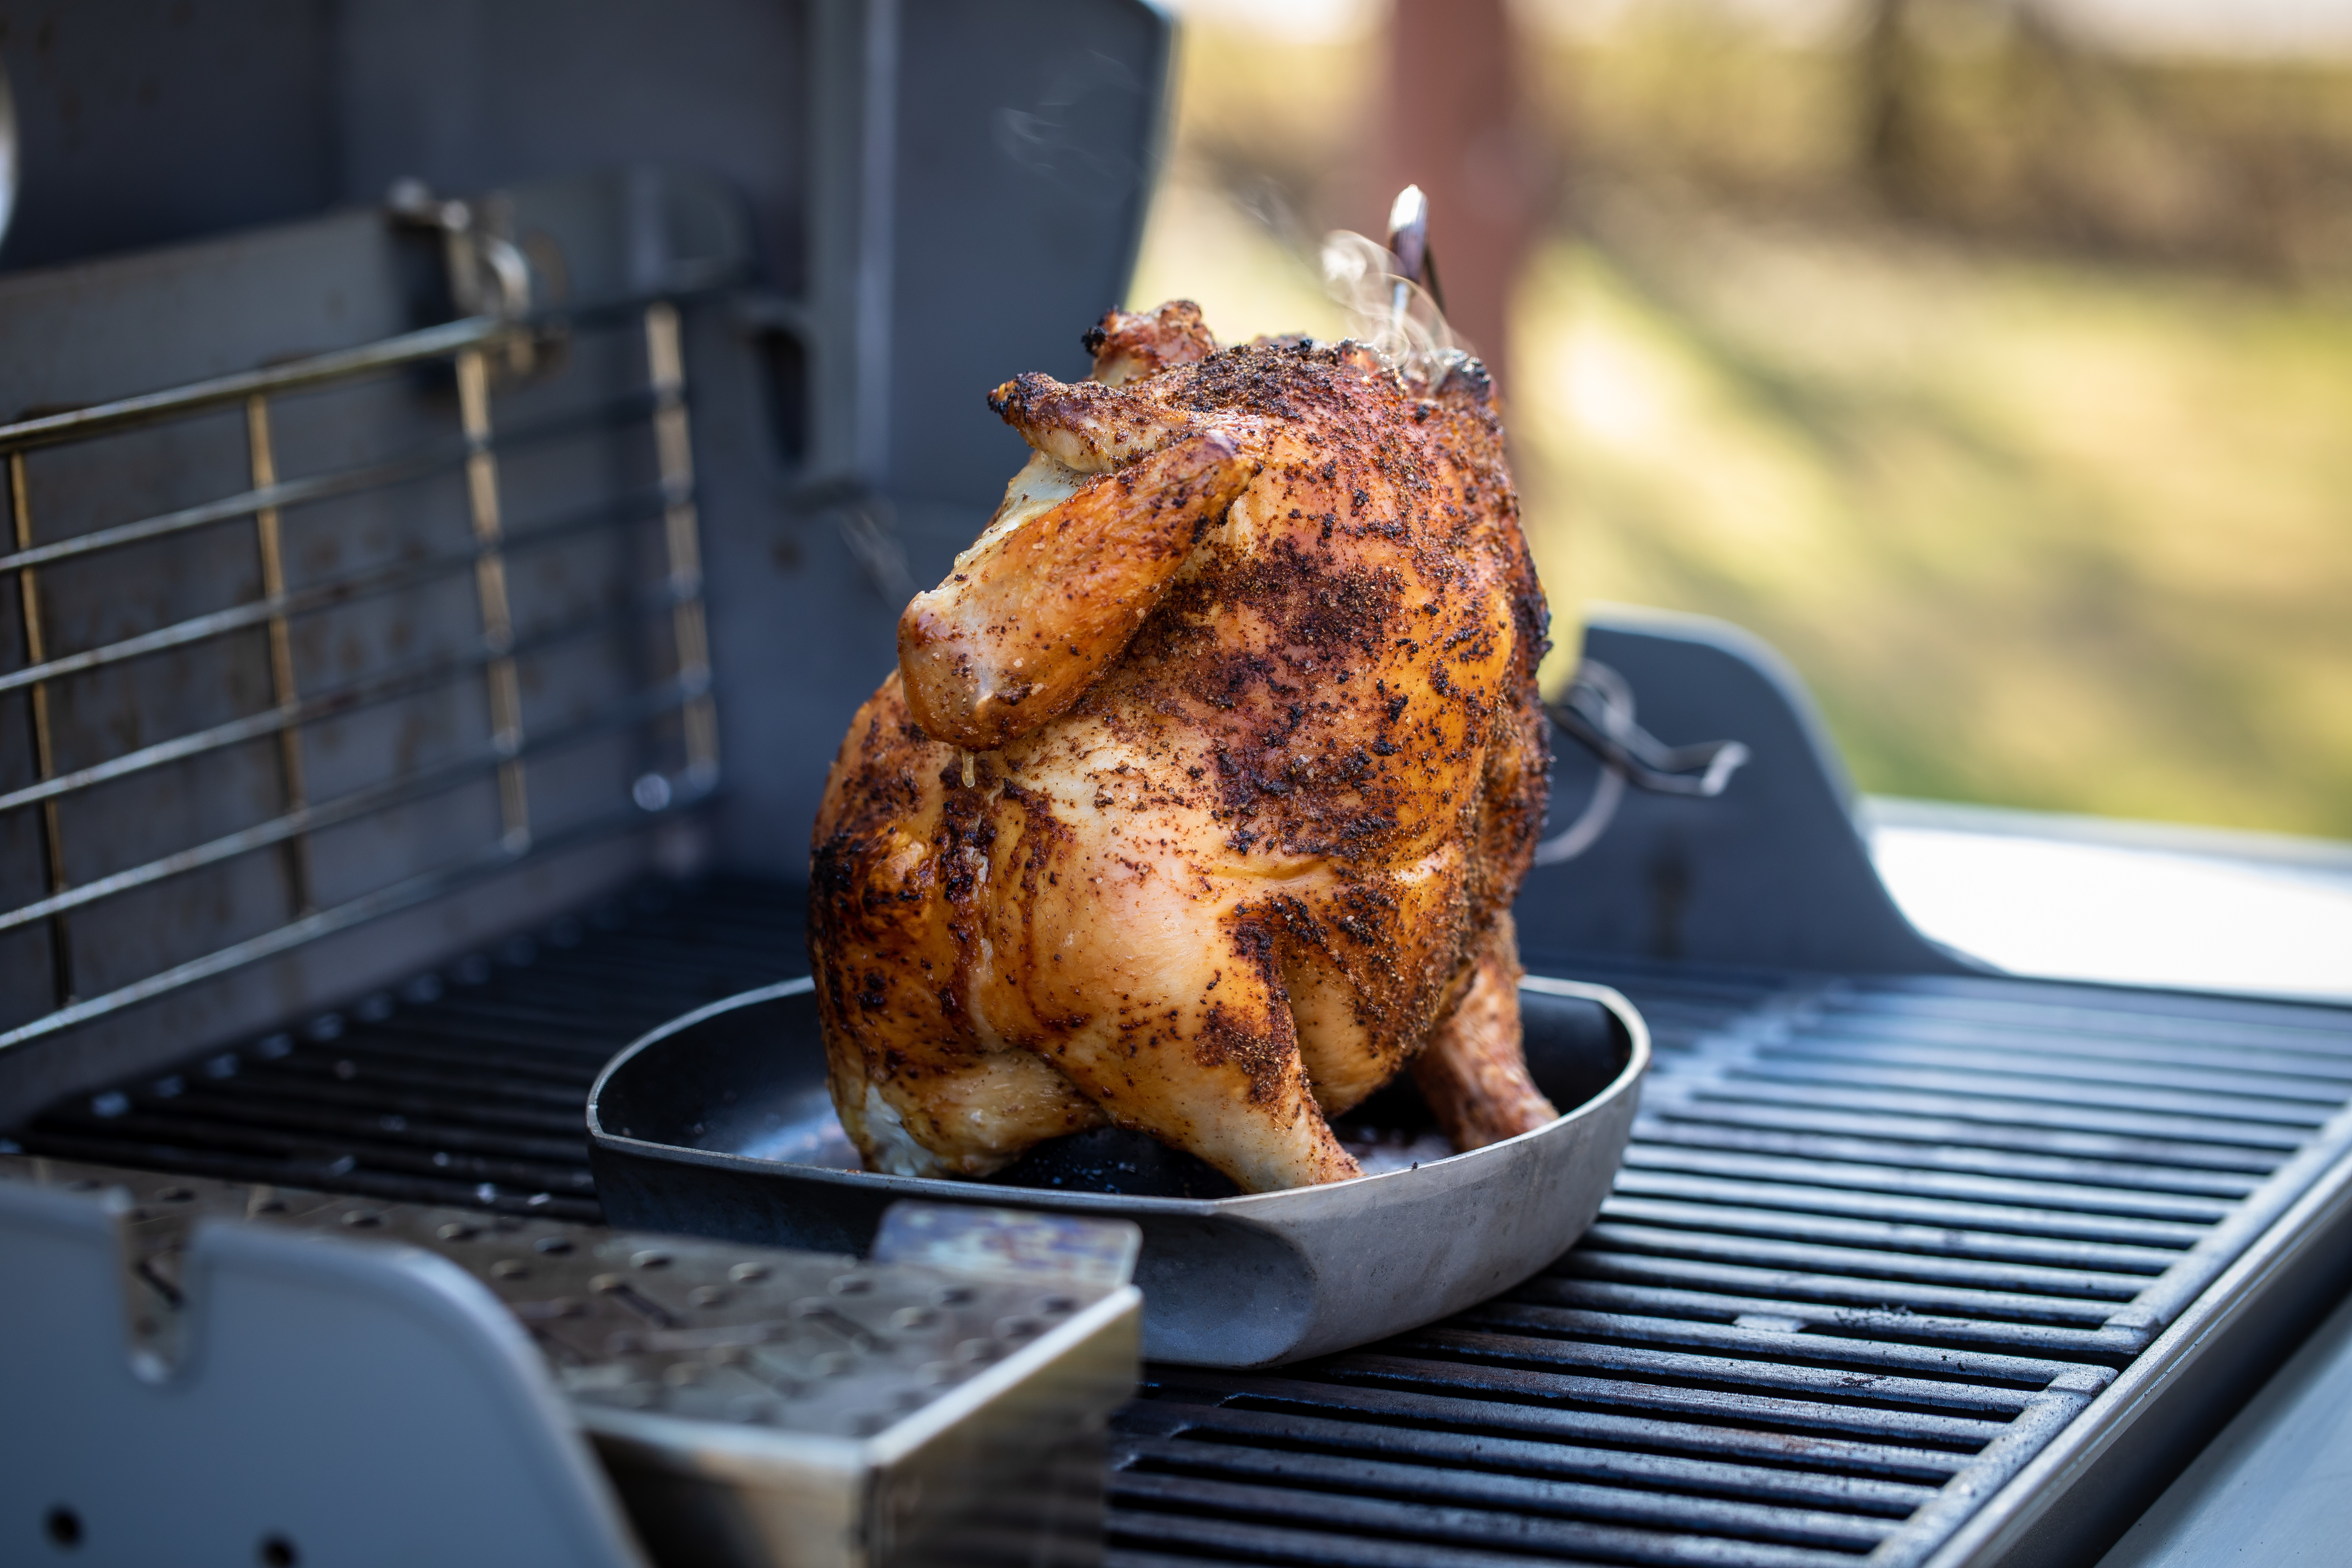 How to Grill a Beer Can Chicken like a 